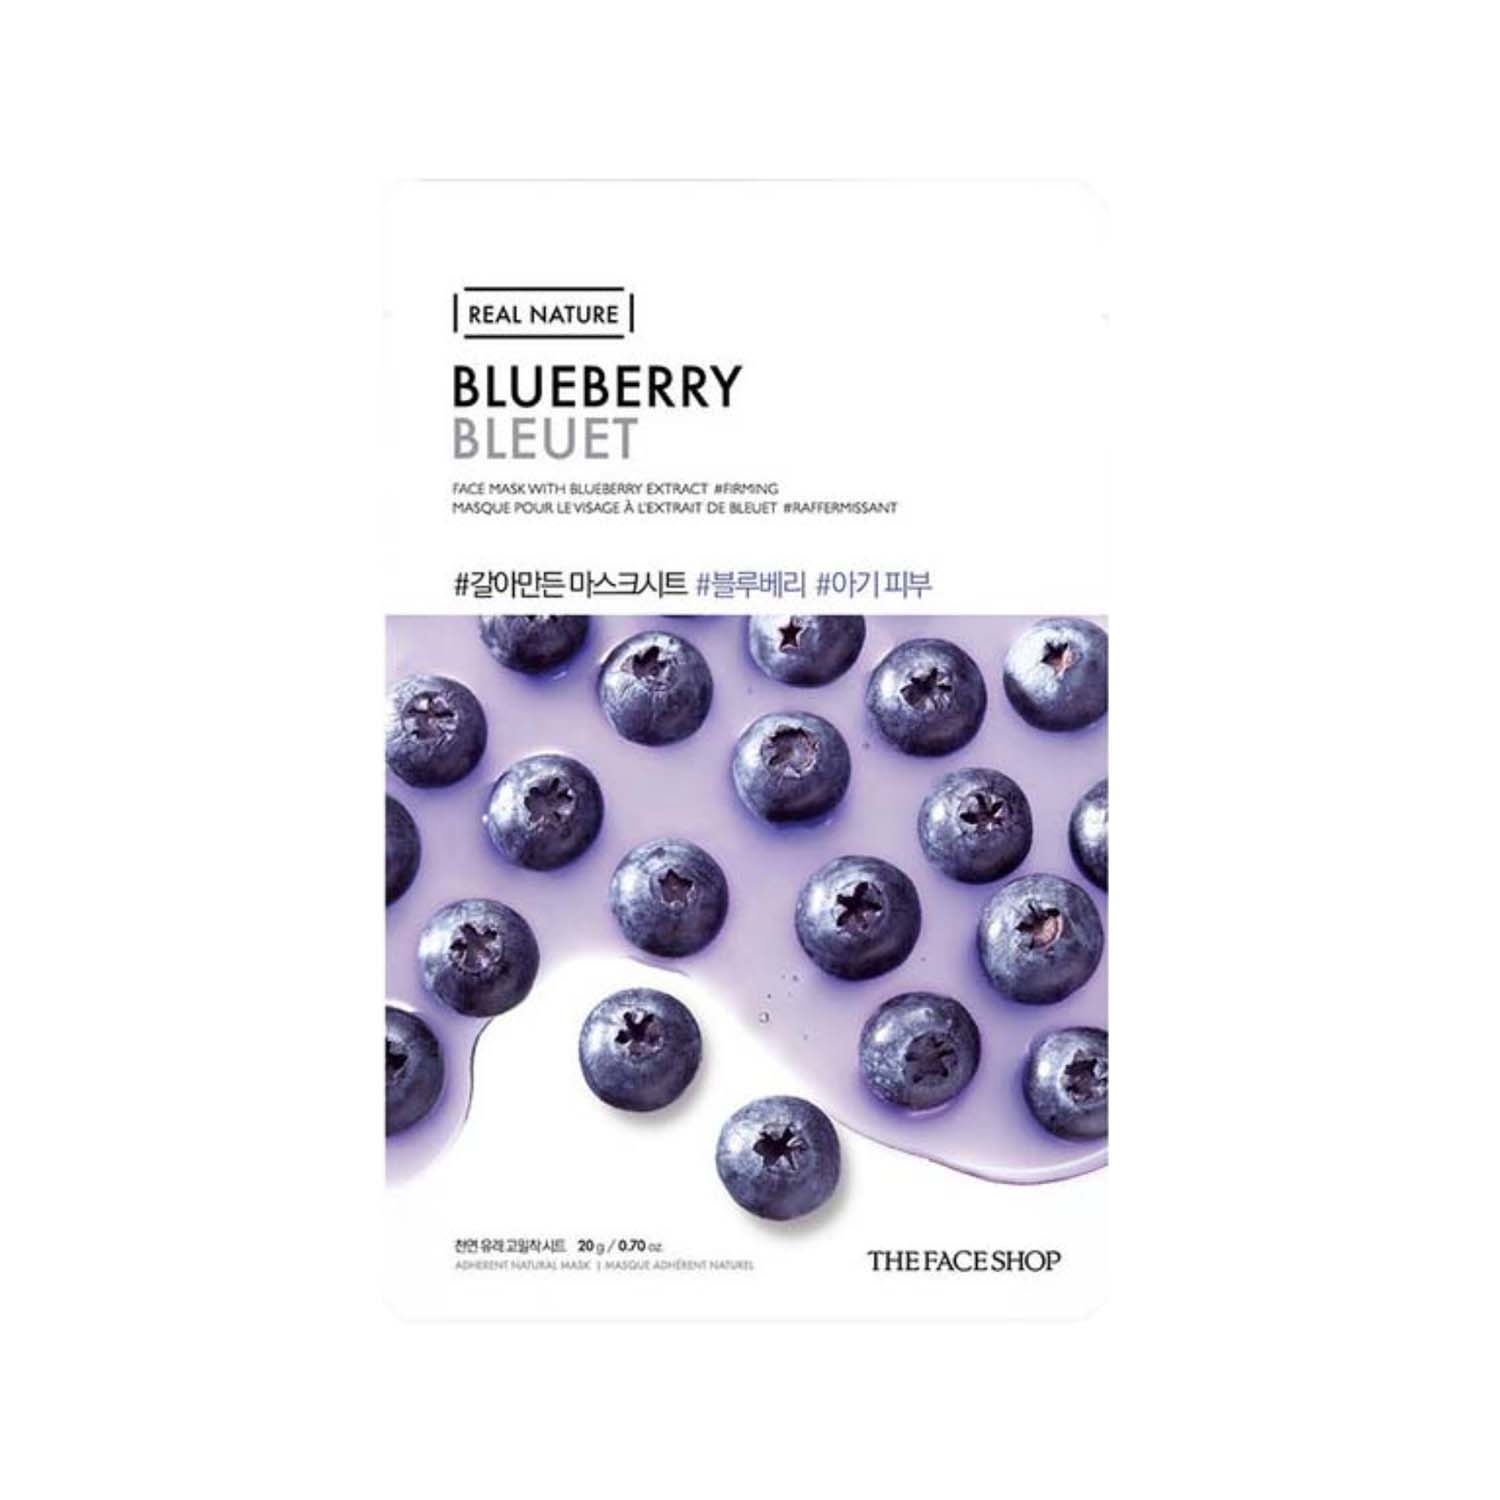 The Face Shop | The Face Shop Real Nature Blueberry Face Sheet Mask (20g)